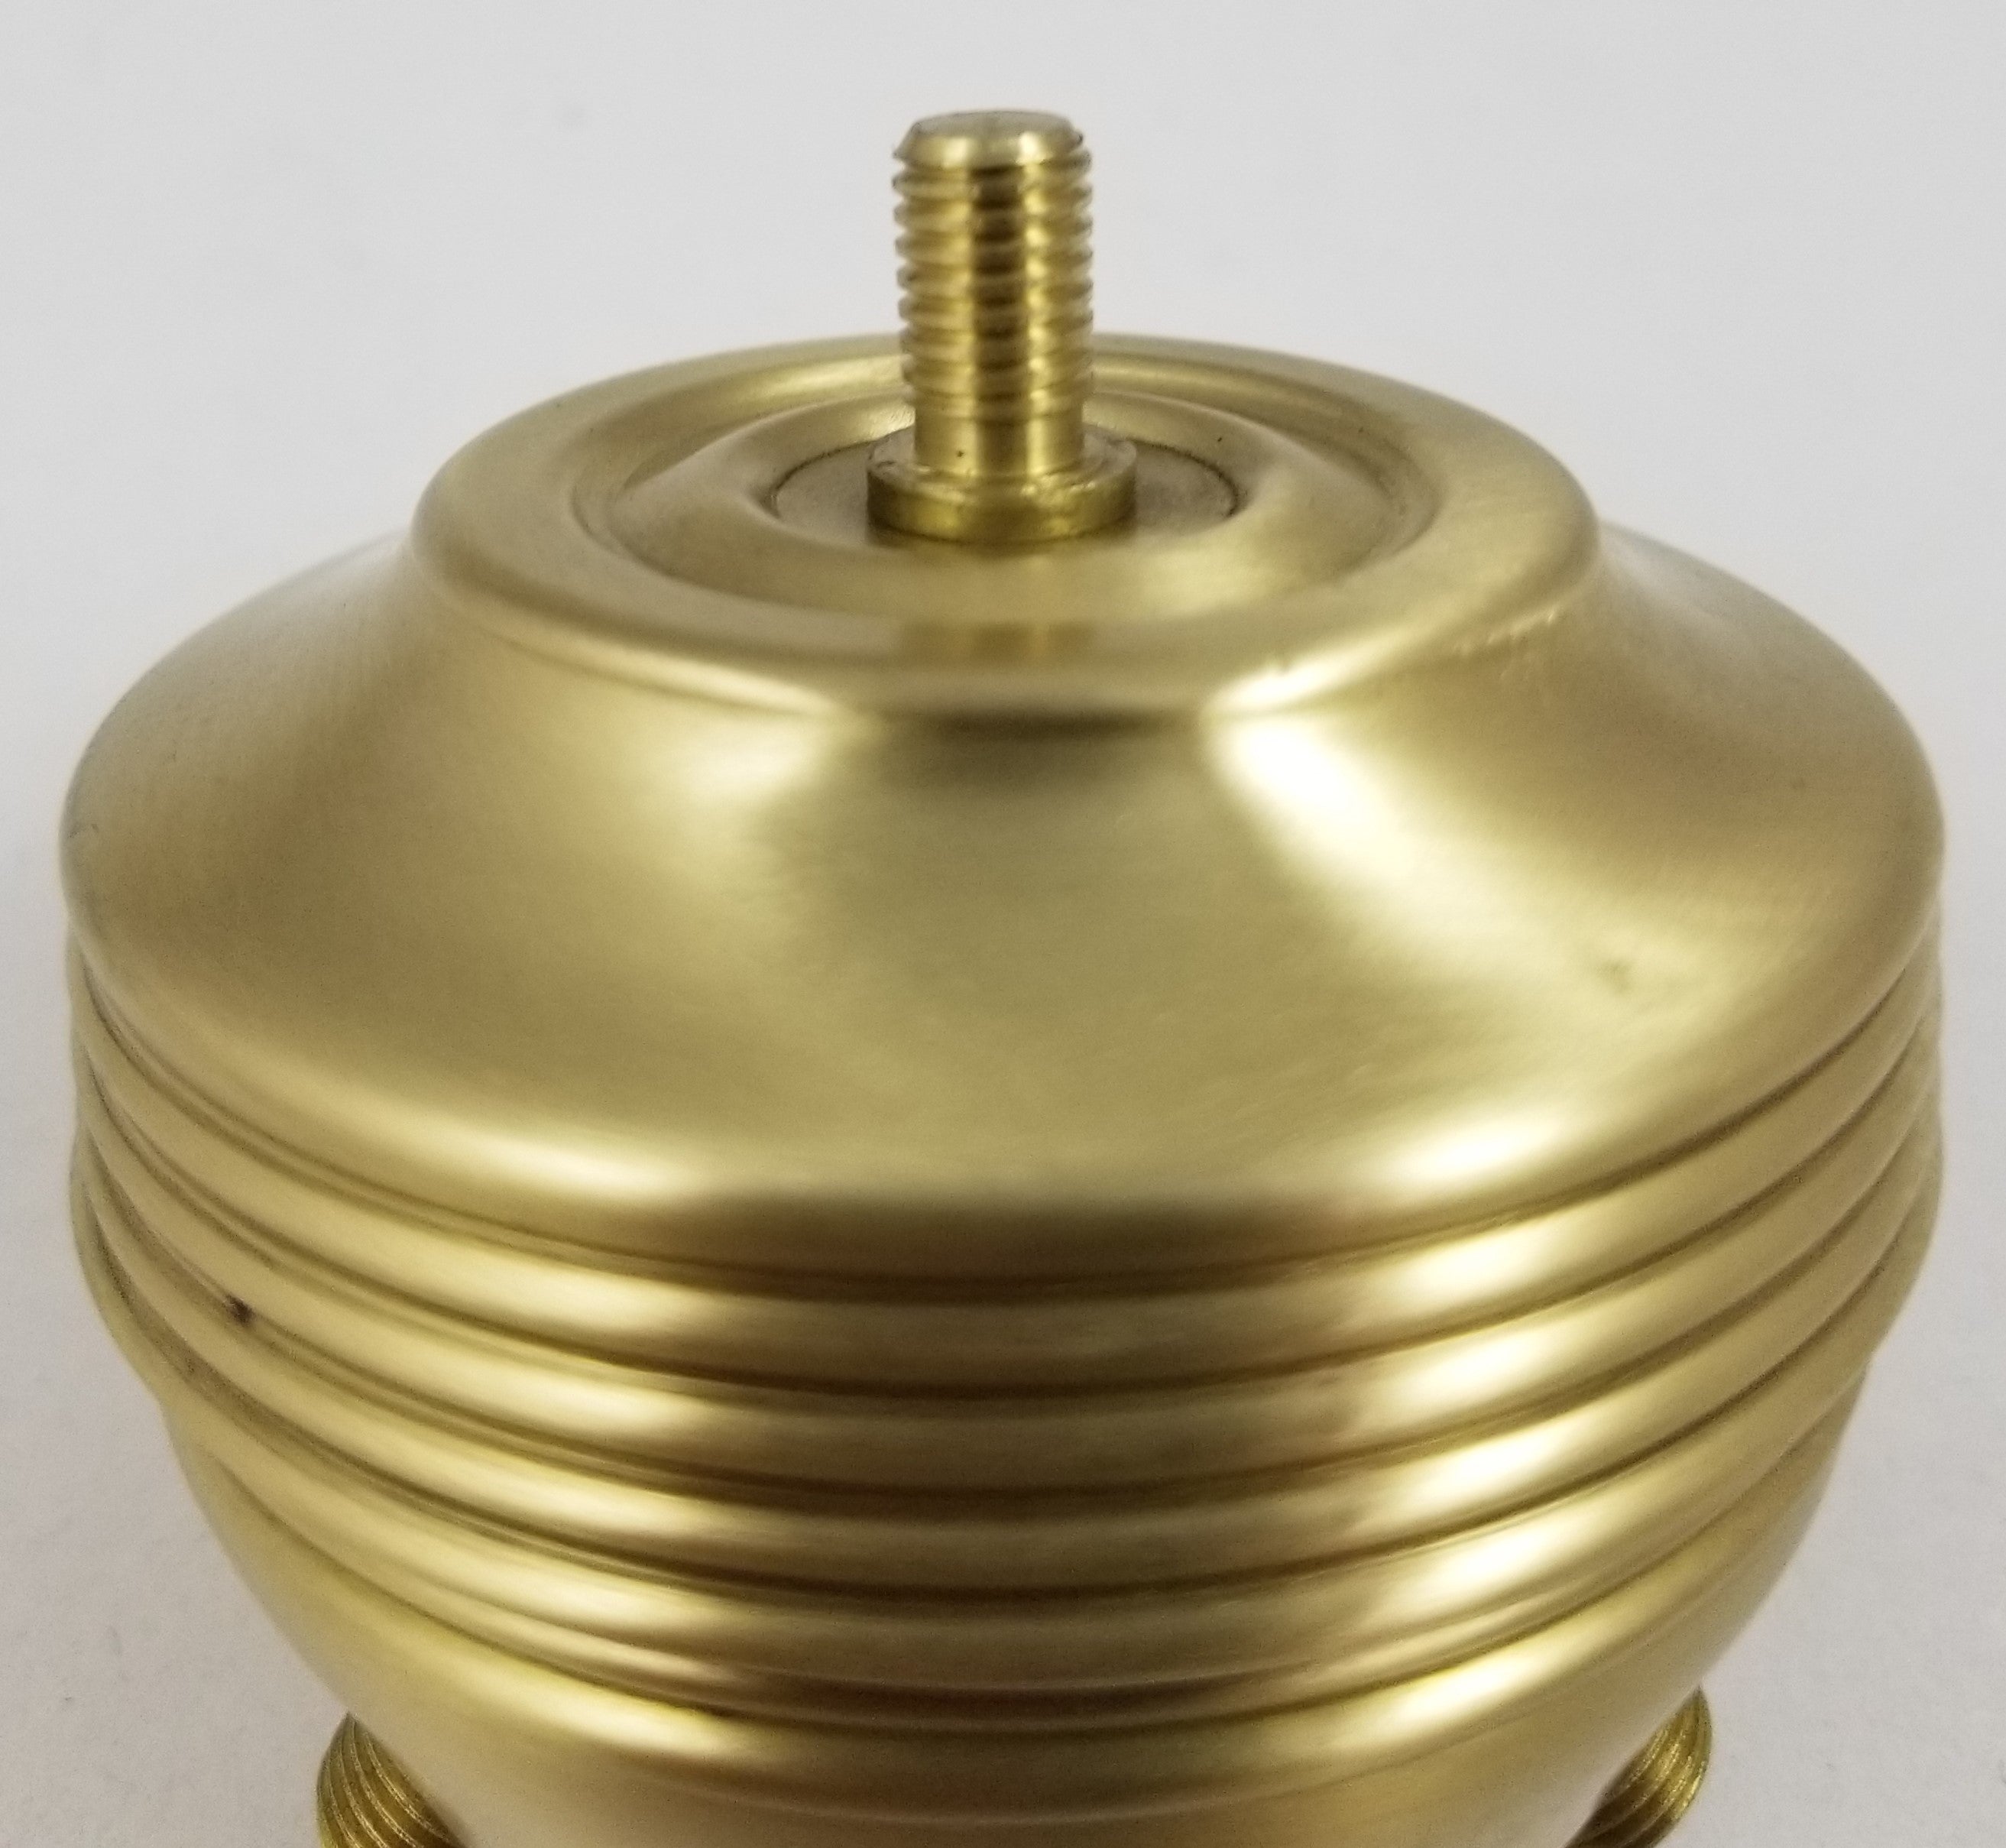 Solid Brushed Brass Cluster Head - Finial of choice sold seperately.